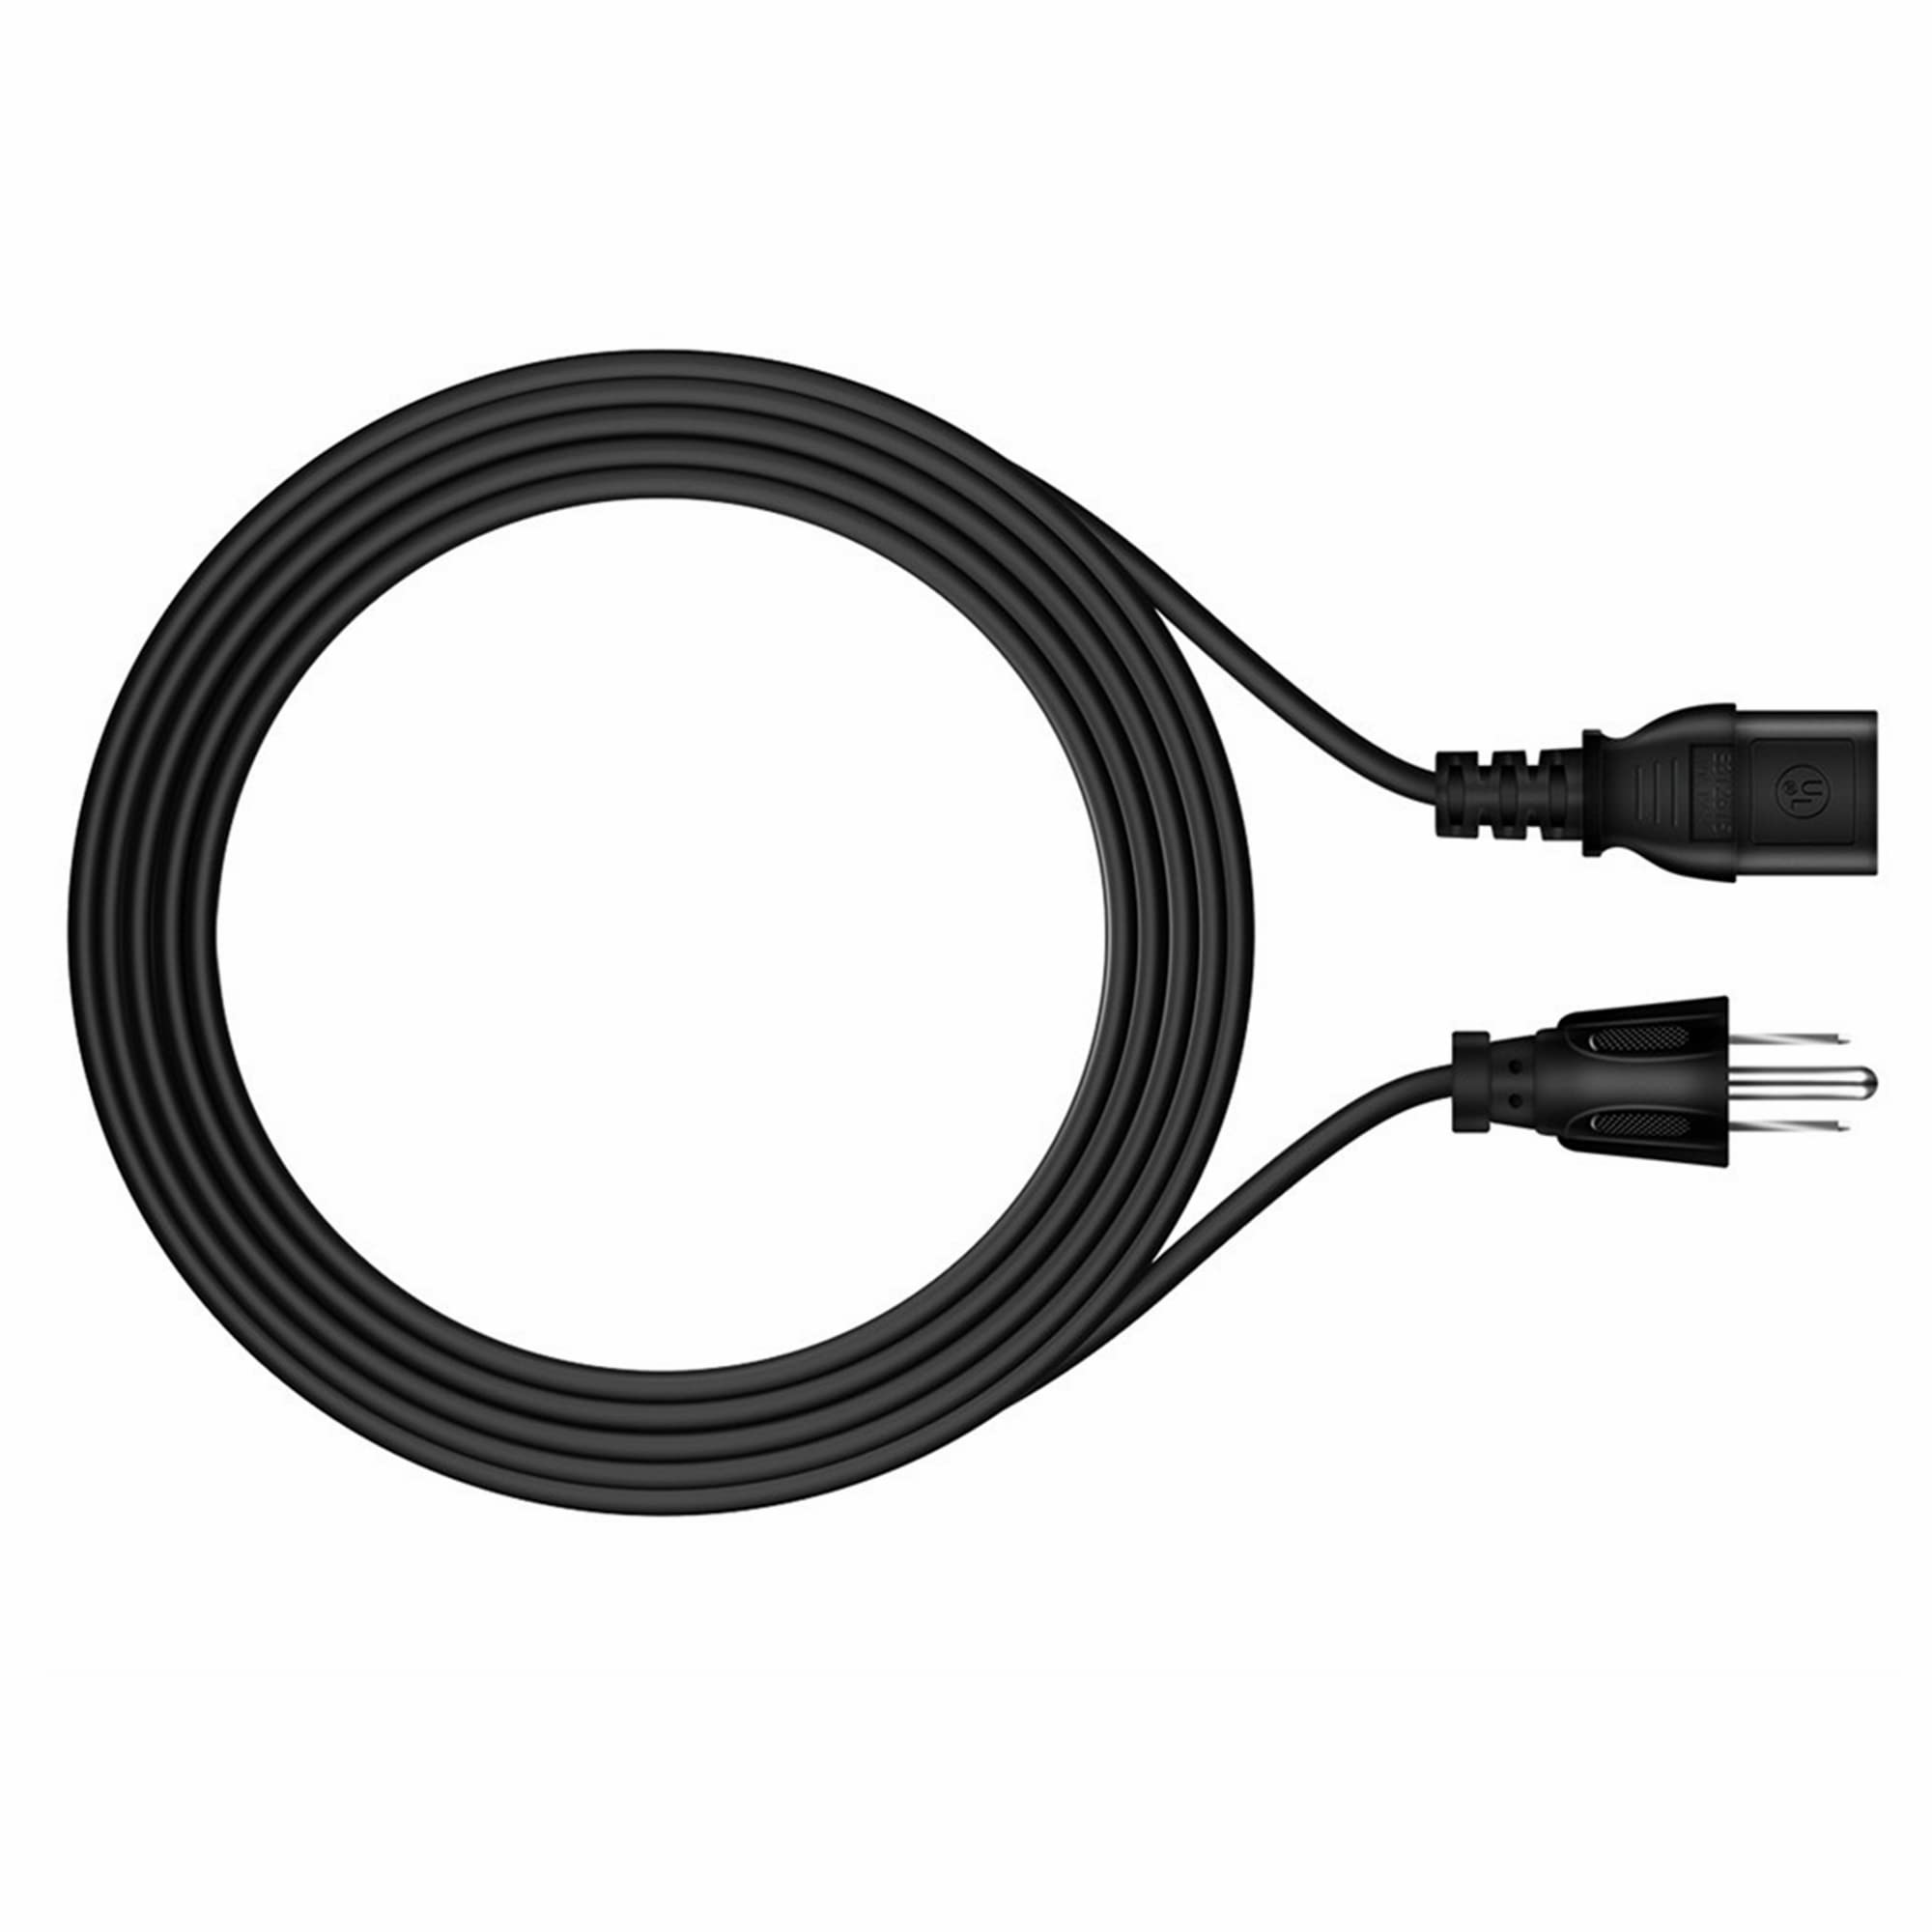 FITE ON 6ft UL Listed AC Power Cord Cable Lead for Zojirushi NL-BAC05 5.5-Cup Micom Rice Cooker